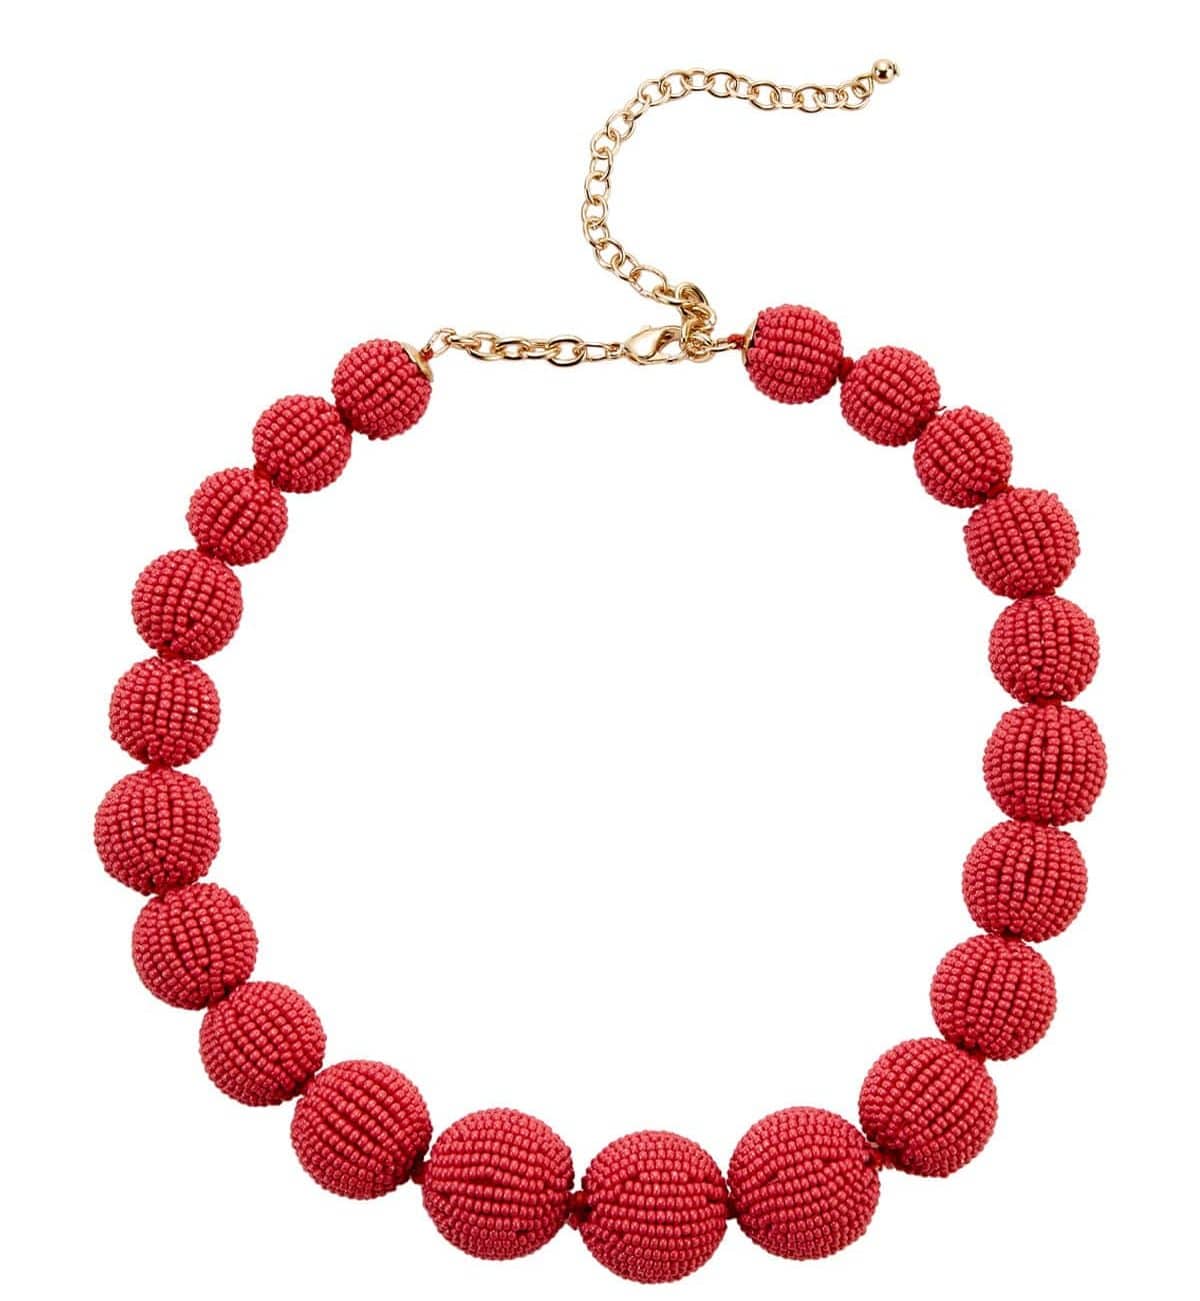 Nancy Pale Red Beaded Necklace